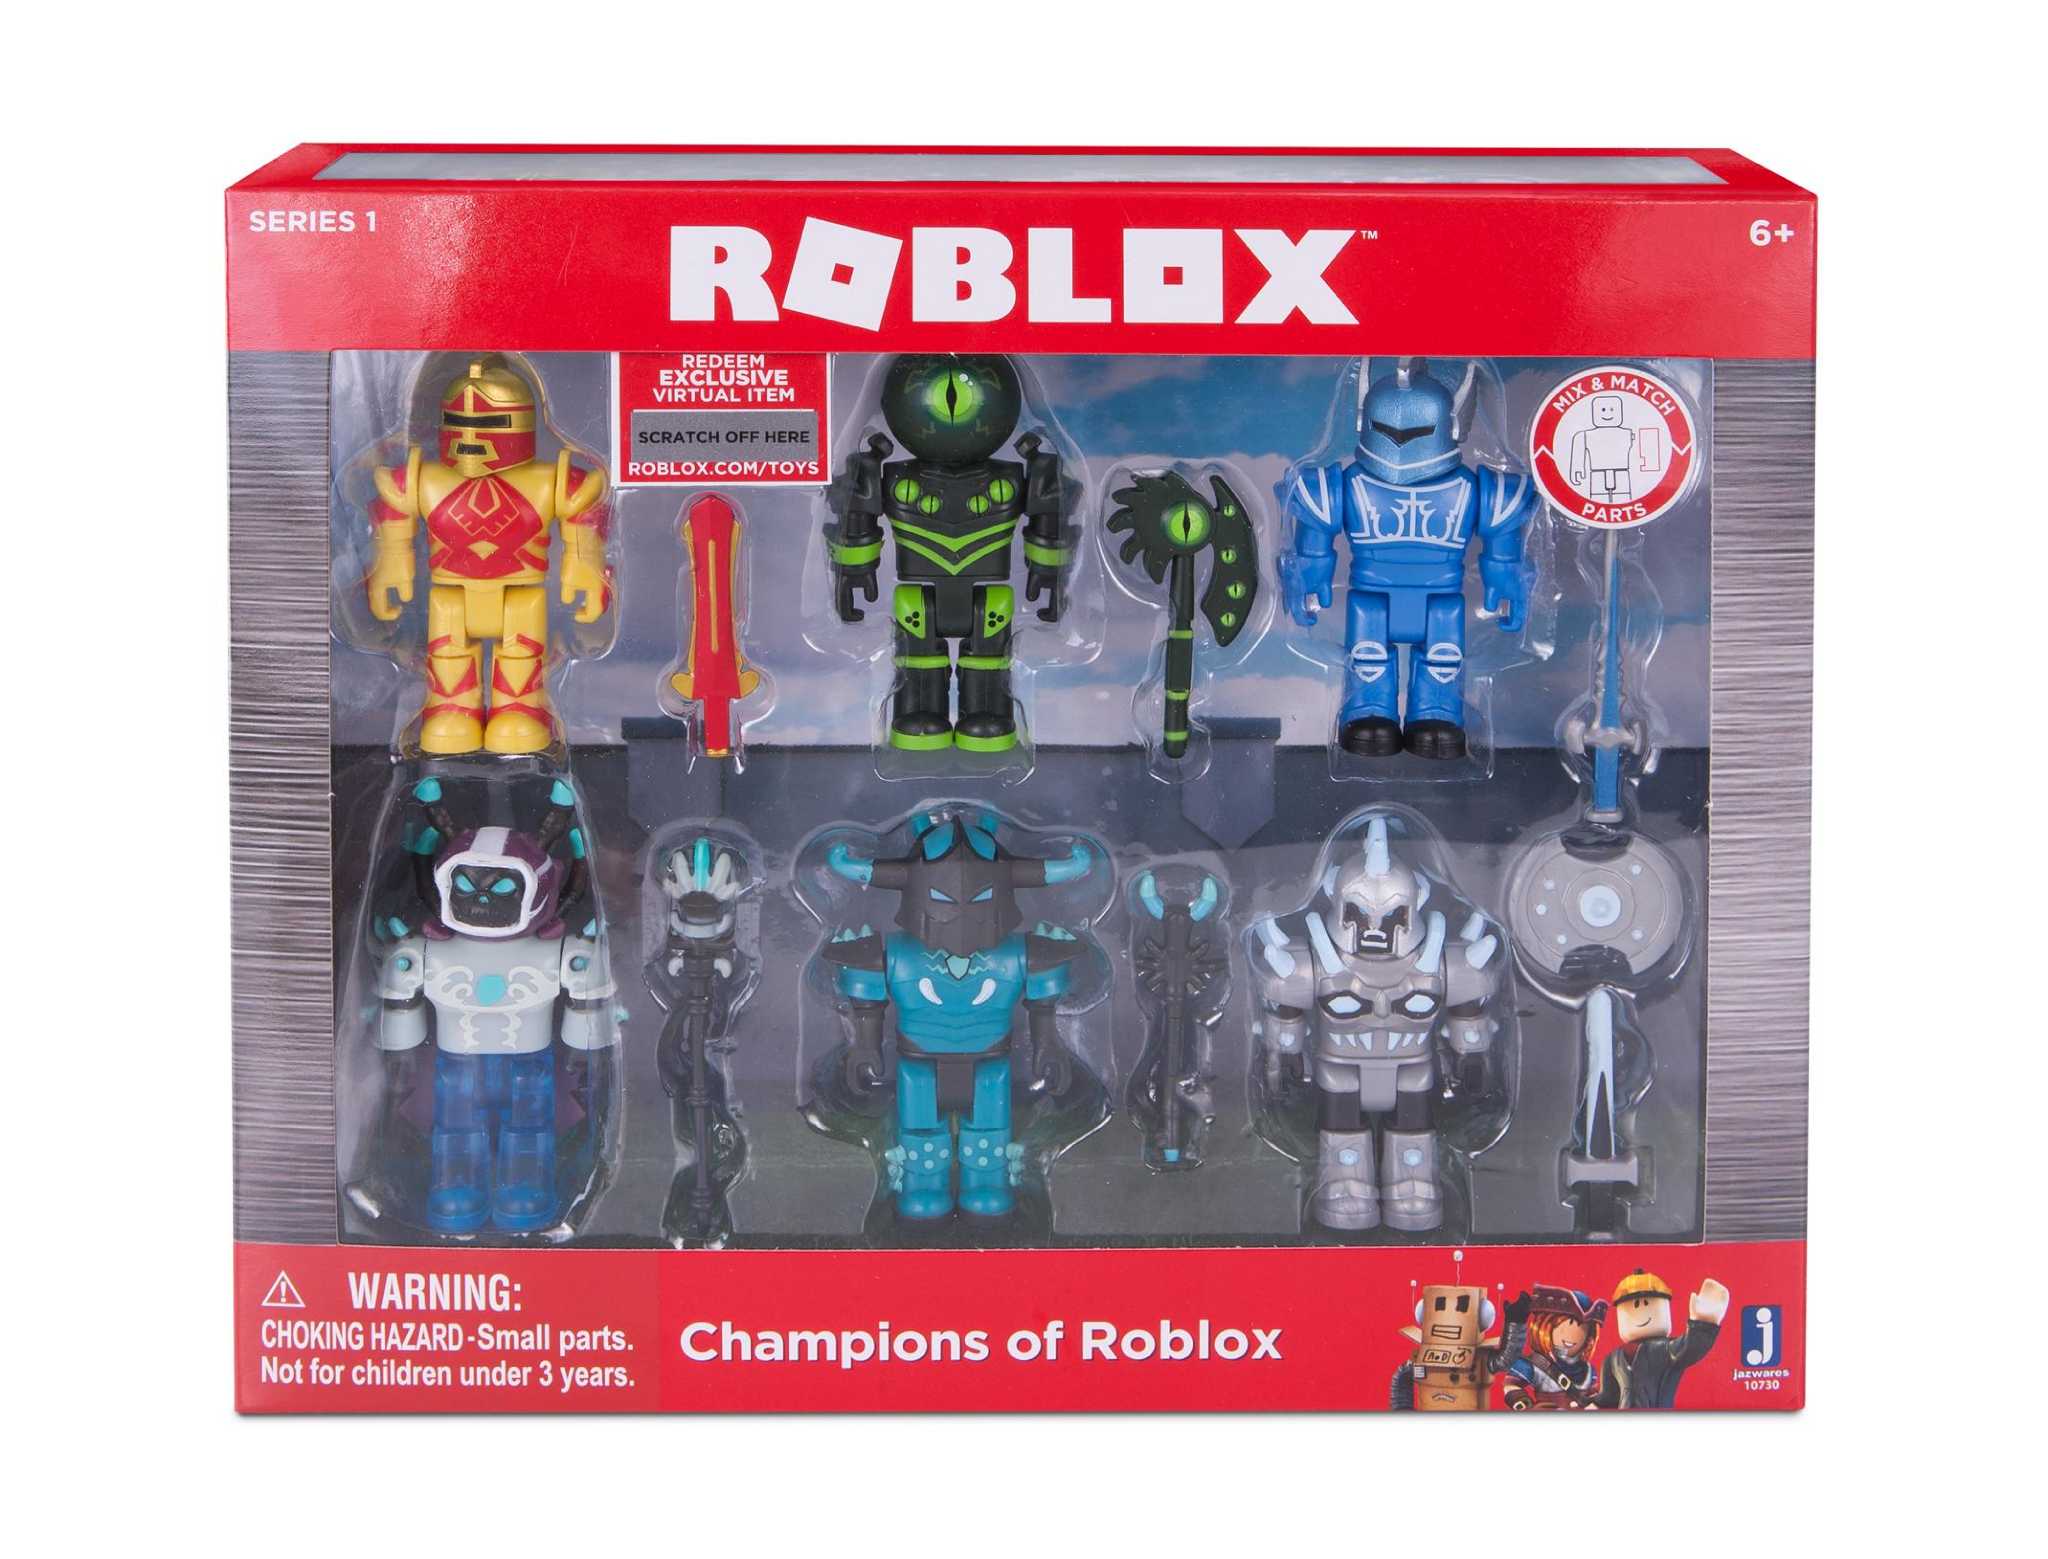 Roblox turning user-designed video game characters into toys